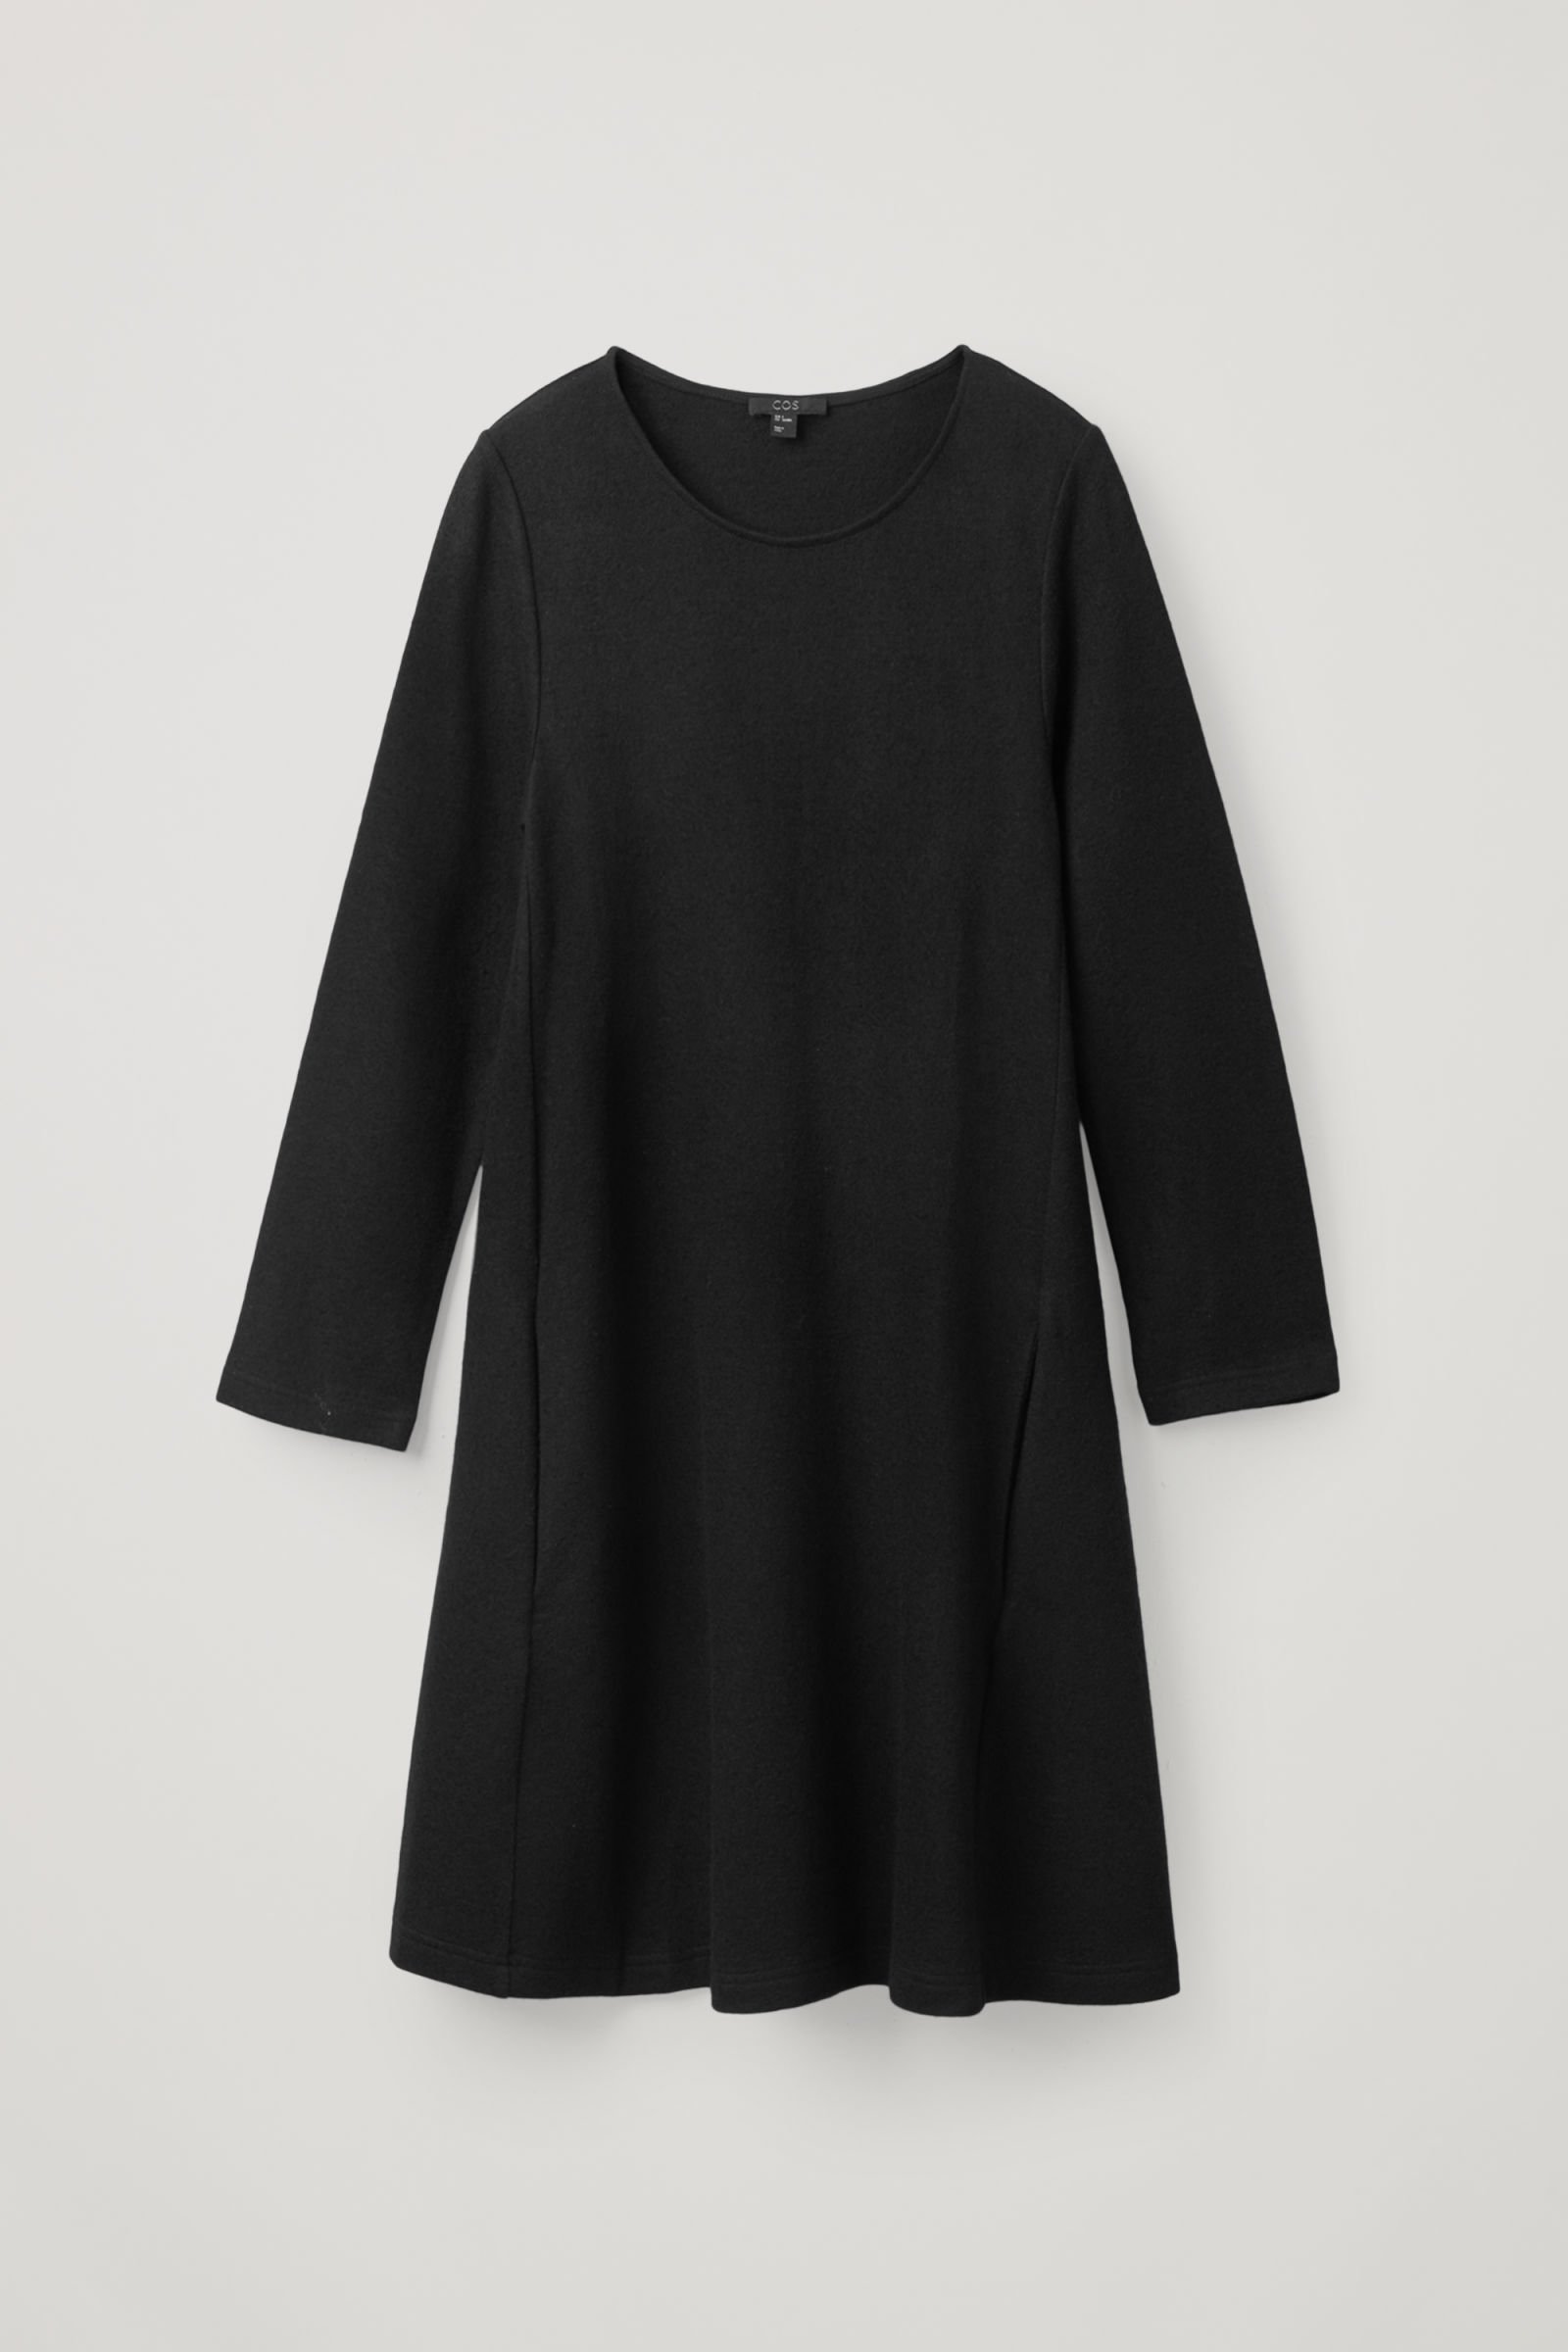 COS A-Line Wool-Cotton Dress in Black | Endource